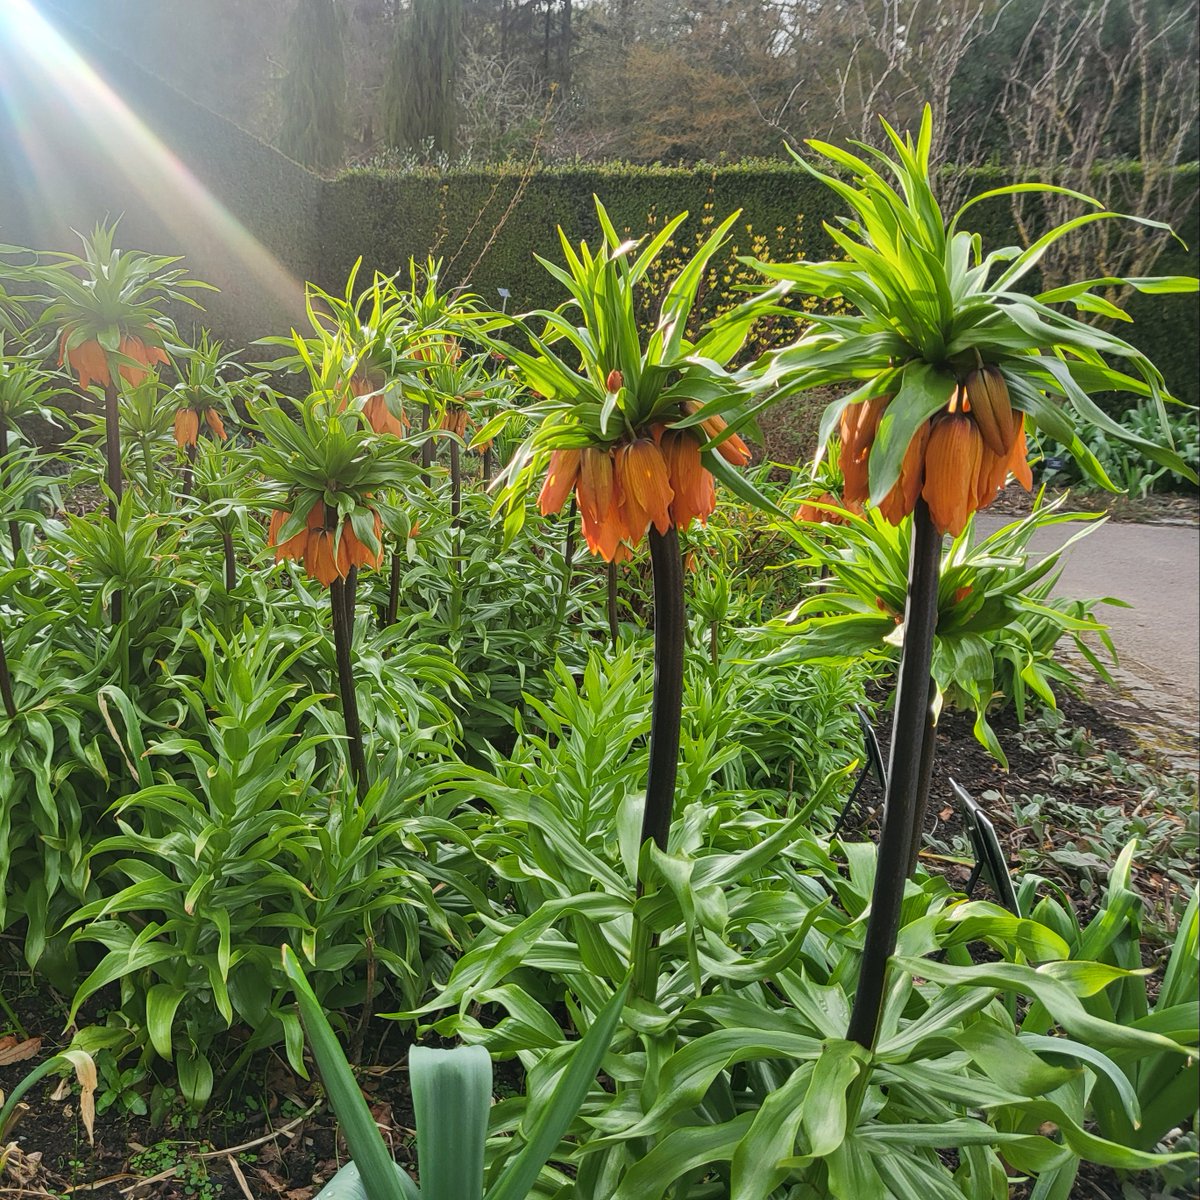 🐝 These spectacular Futillaria imperialis 'Willam Rex' (crown imperial) are well worth seeking out in our Hot Garden but be prepared to have some company, they are a really valuable food source for pollinators at this time of year!